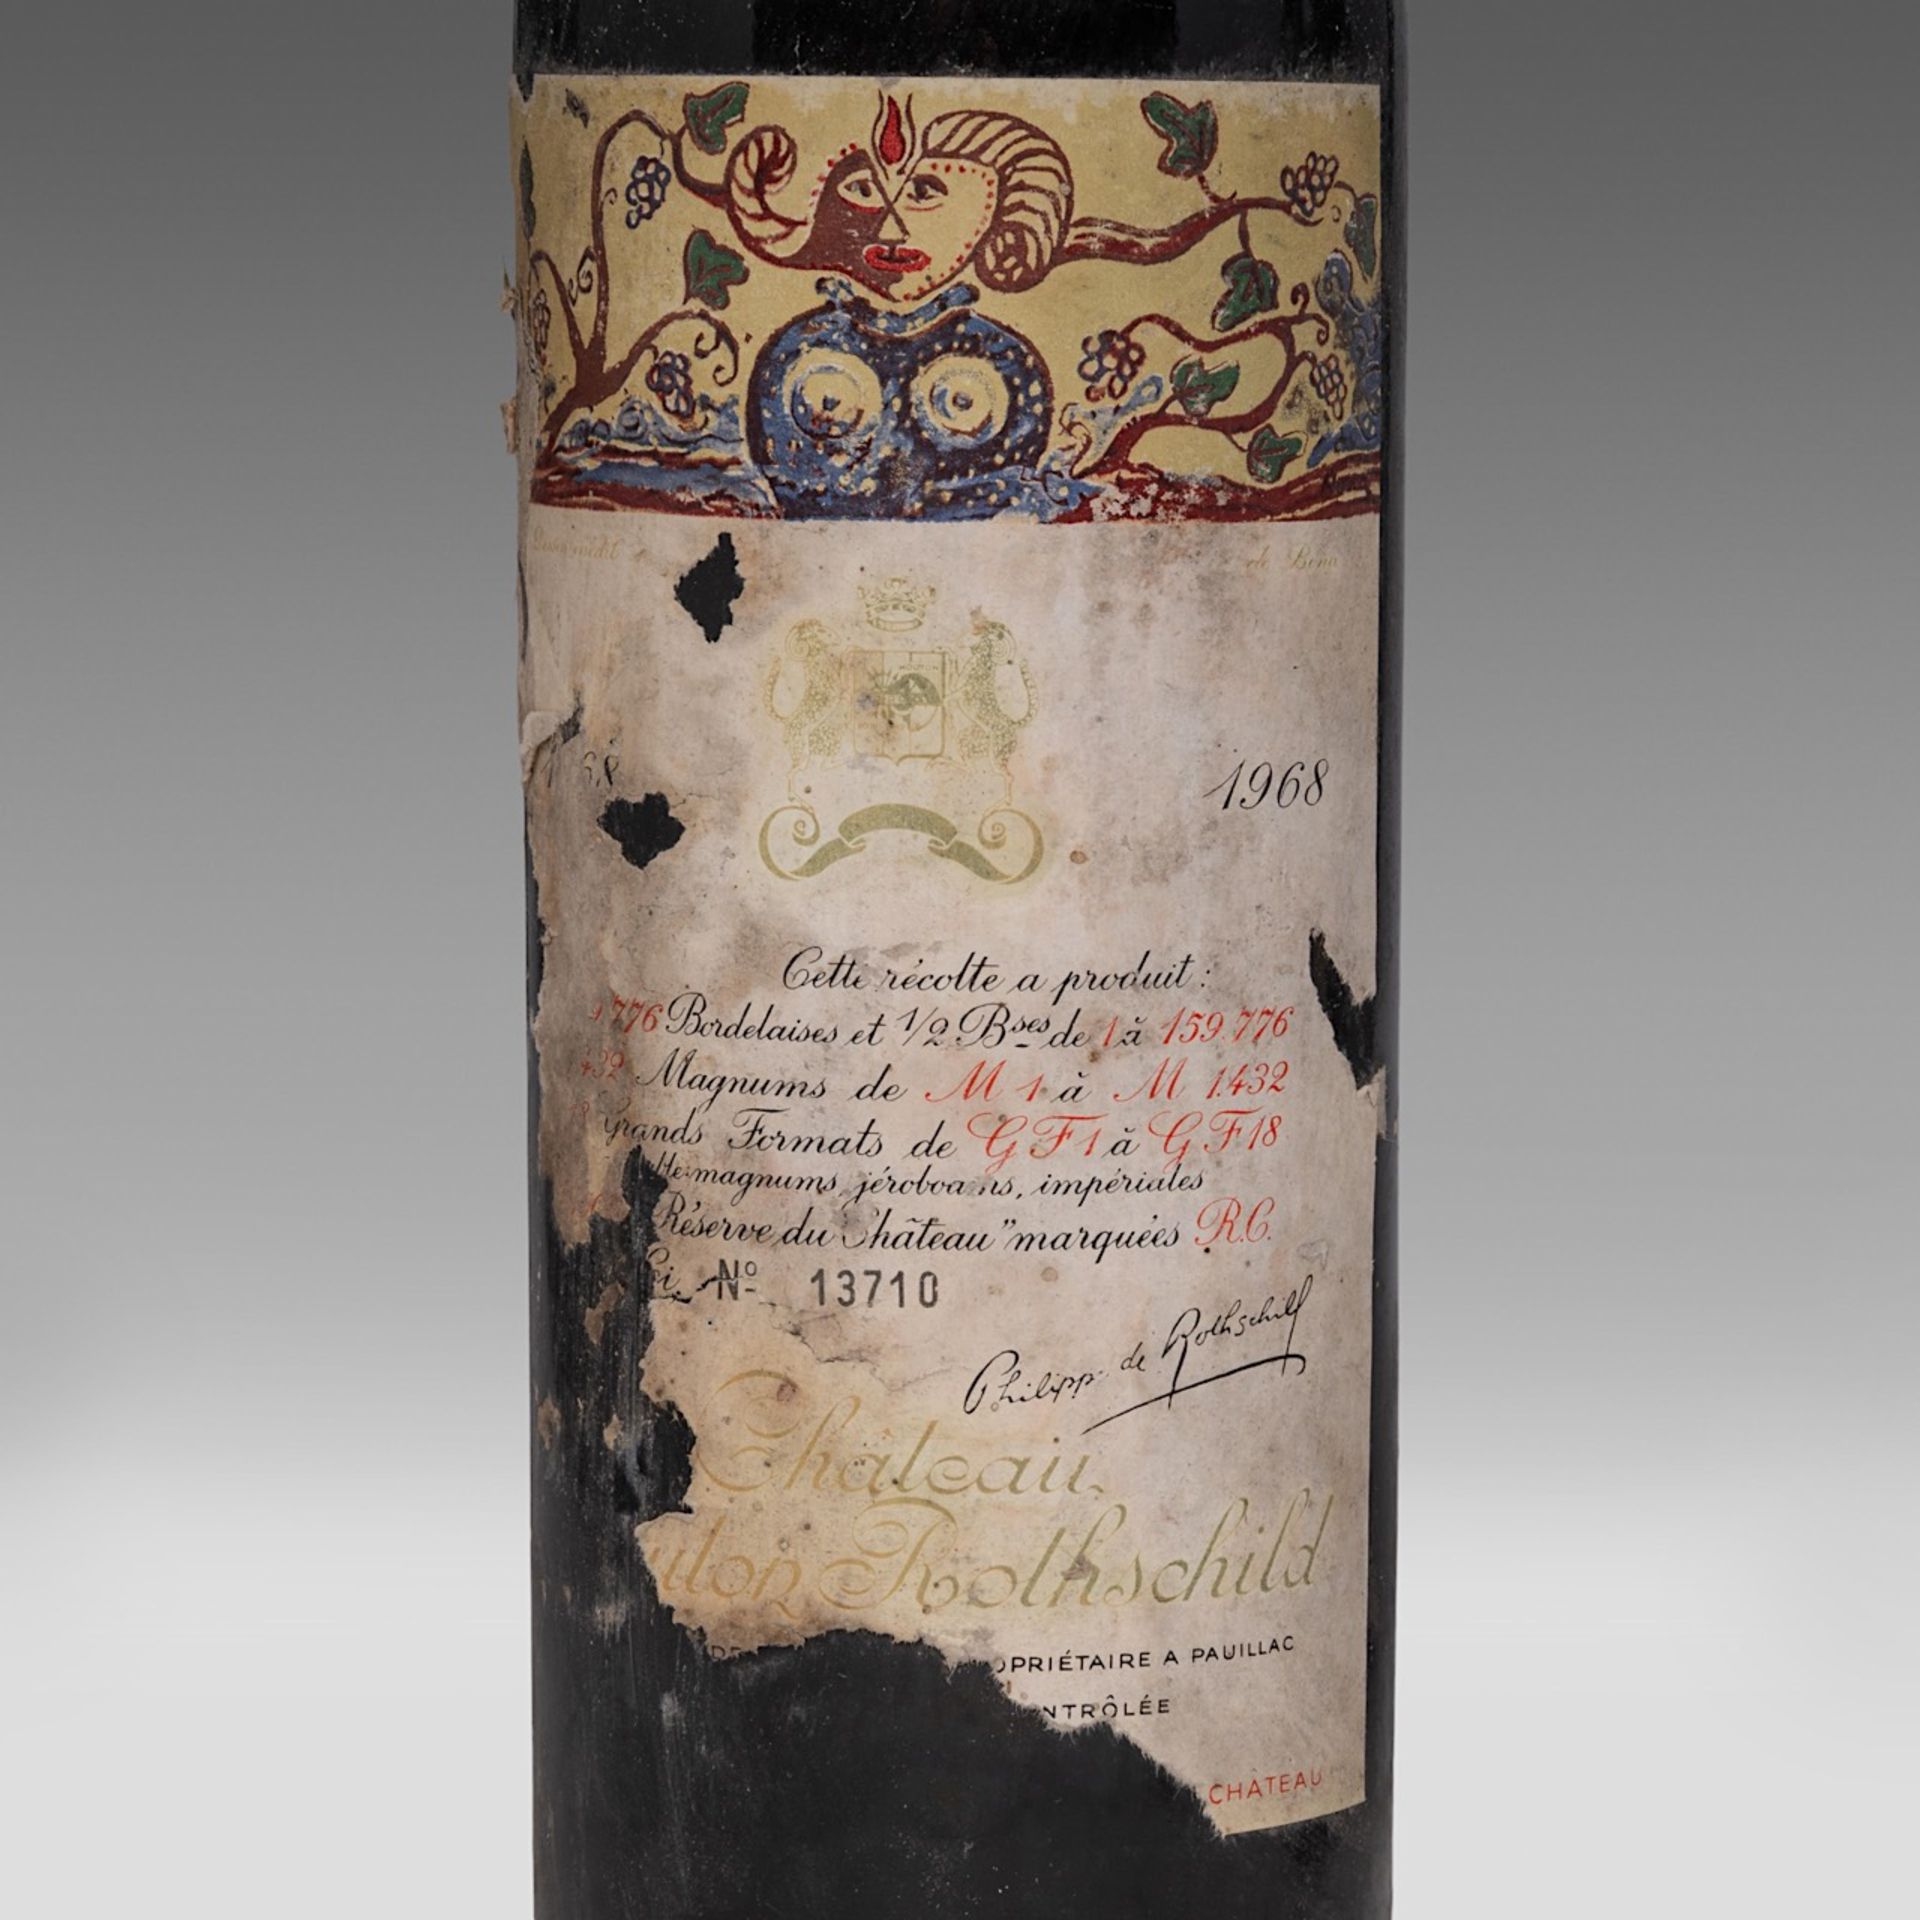 Two bottles 1968 Chateau Mouton Rothschild and a 1990 Chateau Mouton Rothschild - Image 4 of 5